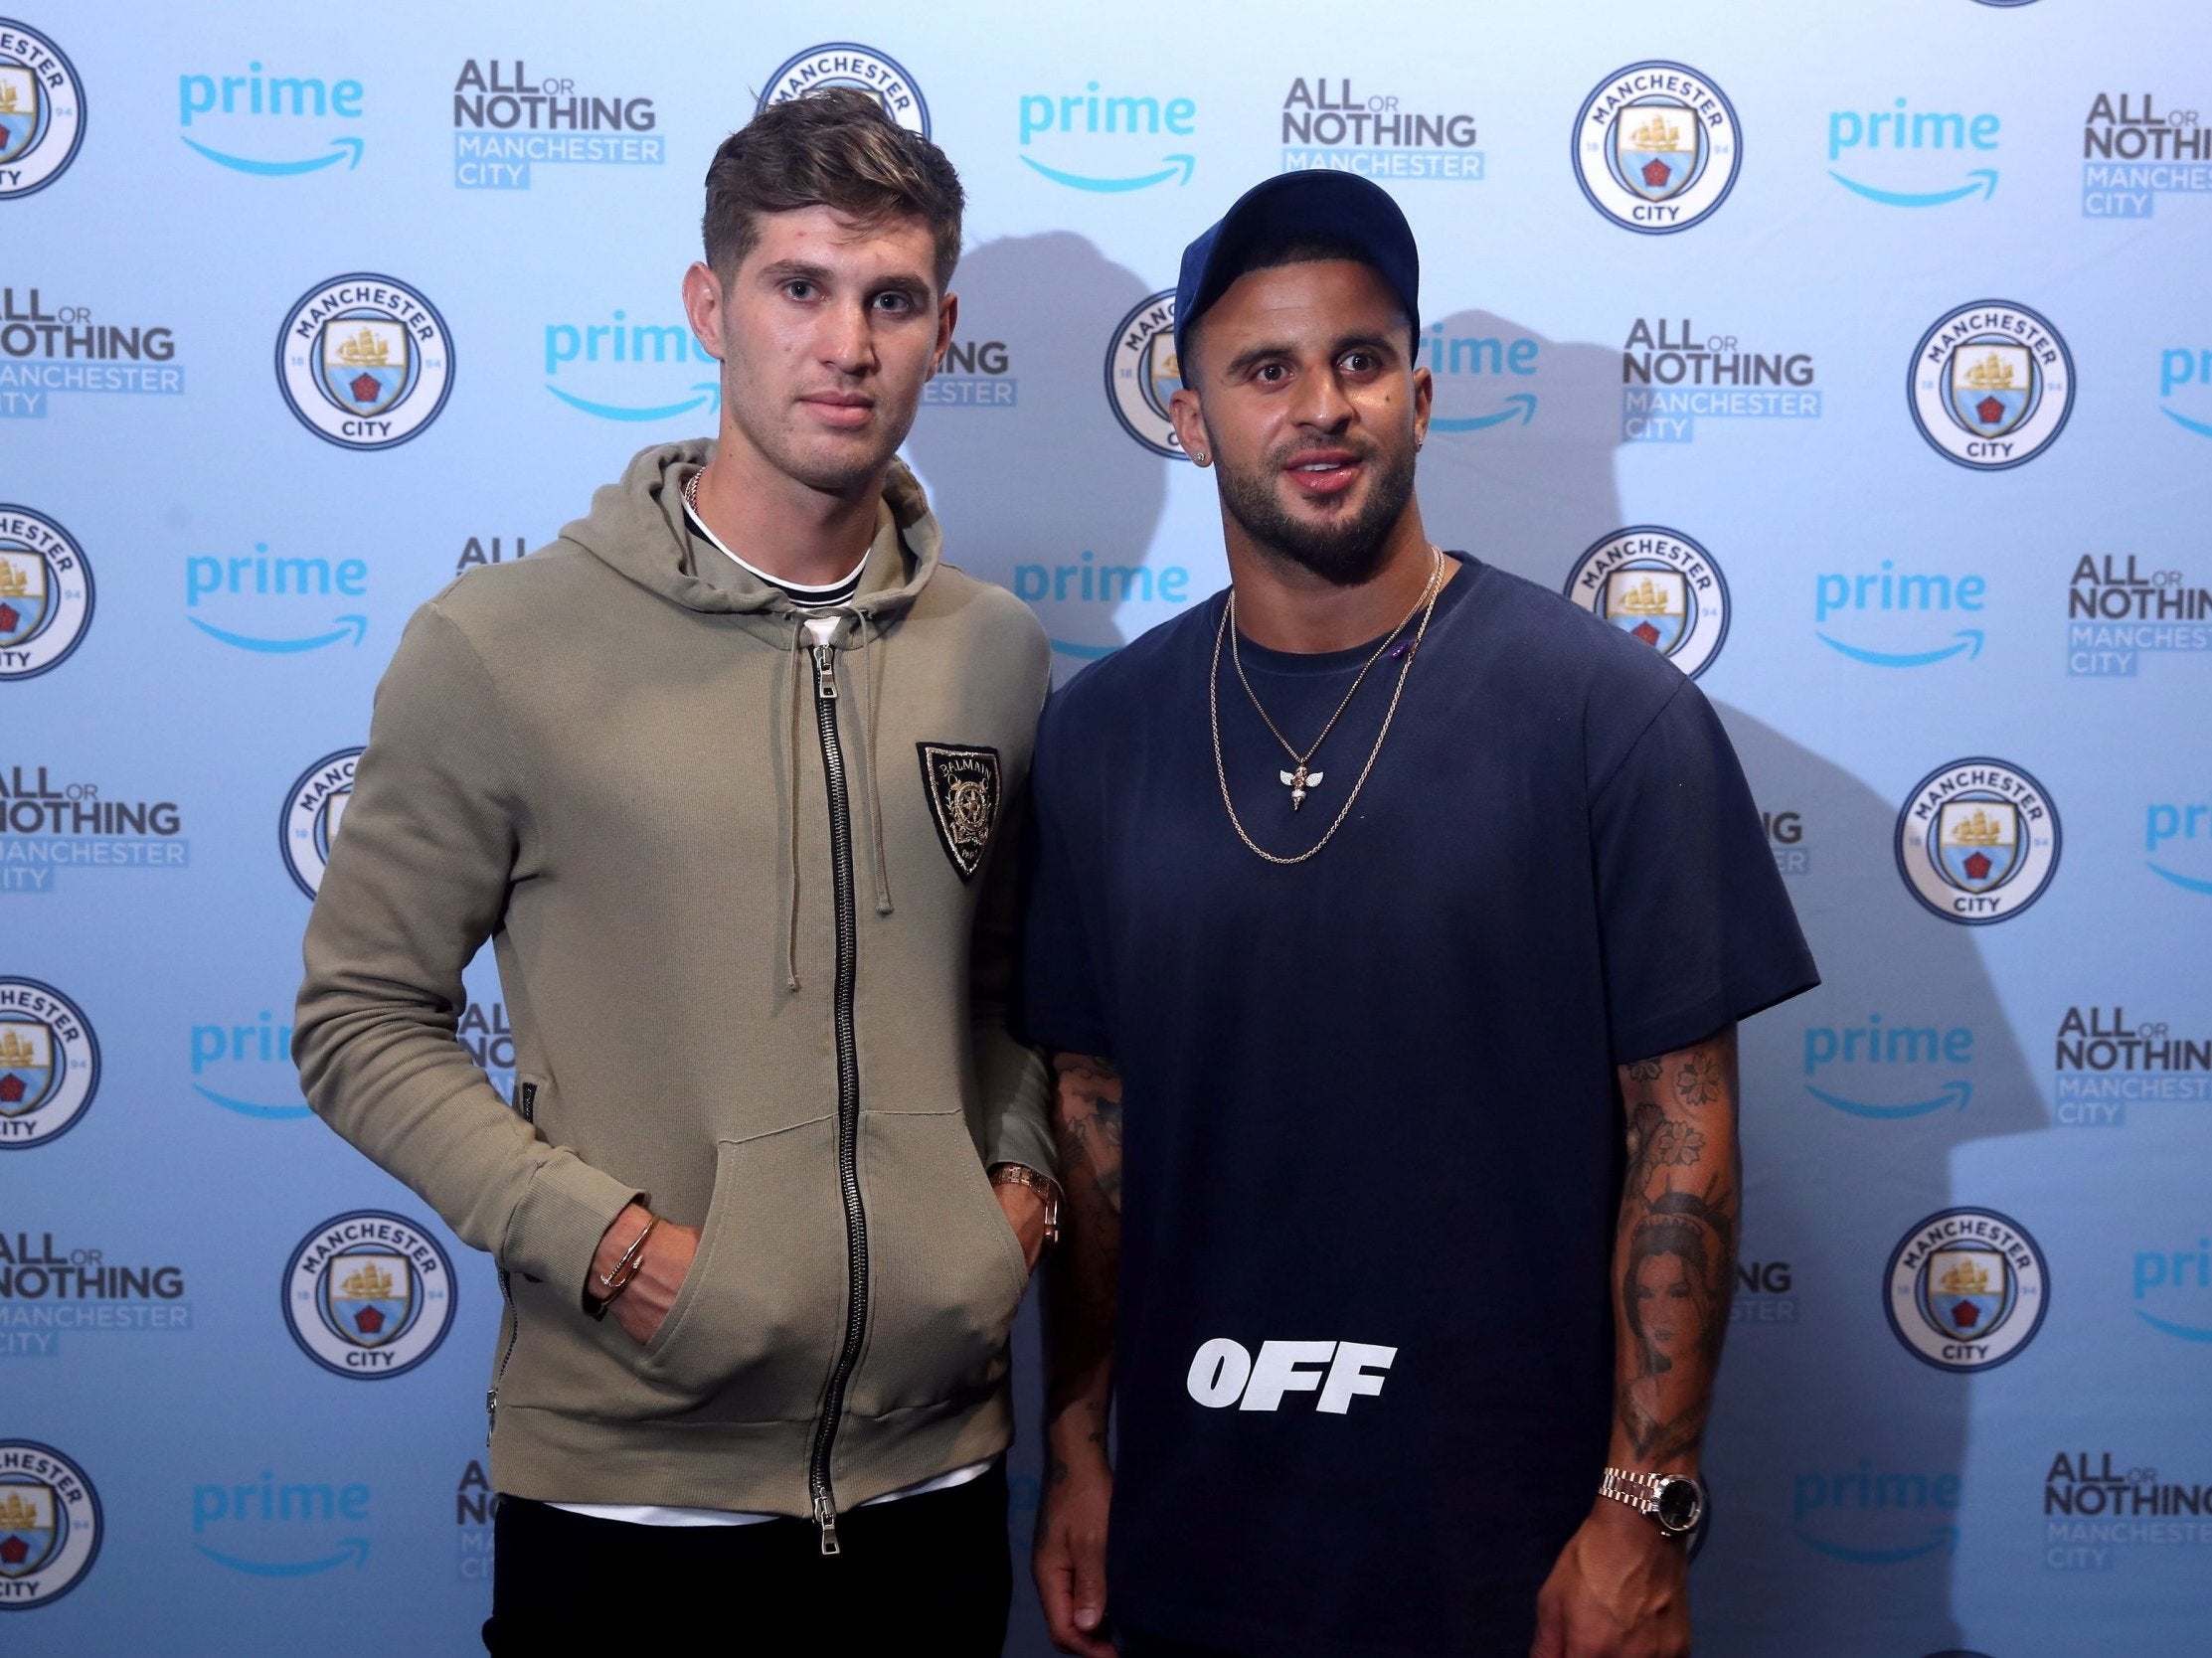 Kyle Walker (right) believes Manchester City have enough squad depth to cover the loss of De Bruyne